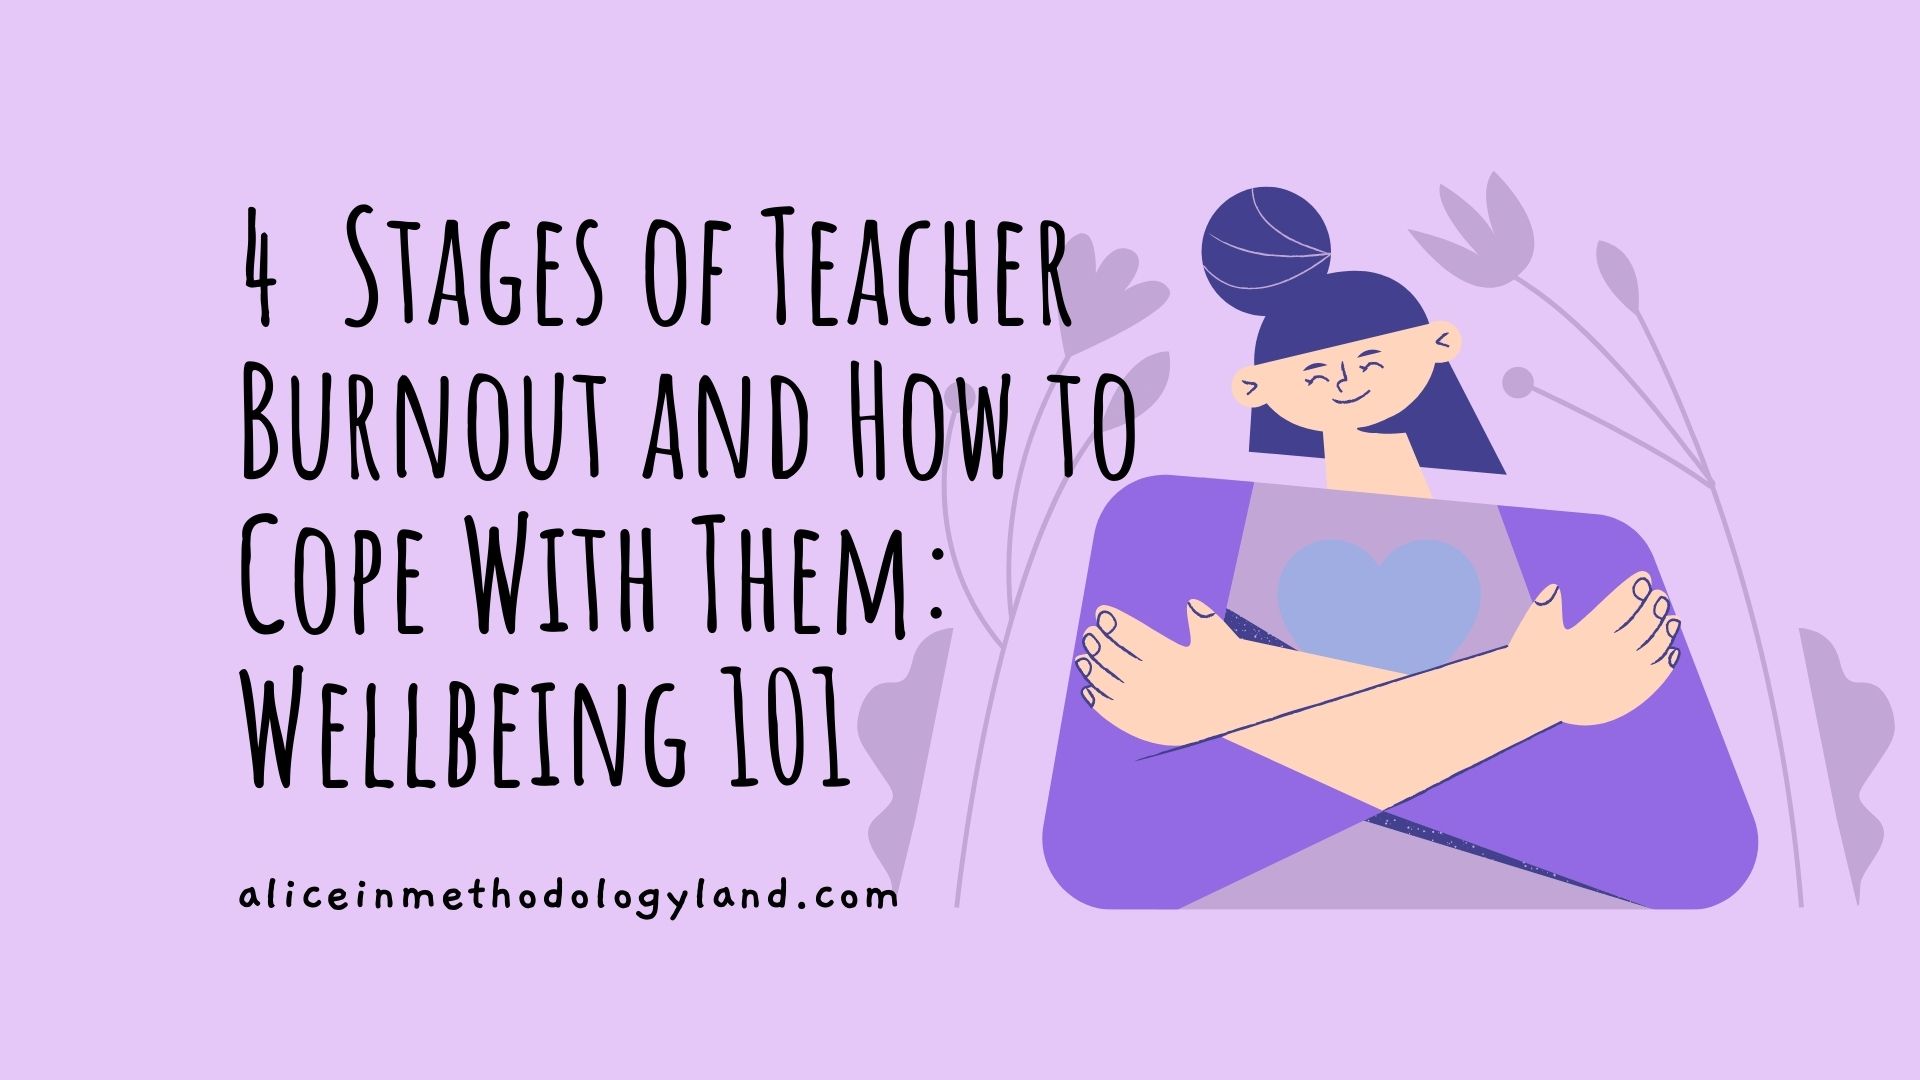 4  Stages of Teacher Burnout and How to Cope With Them: Well-being 101